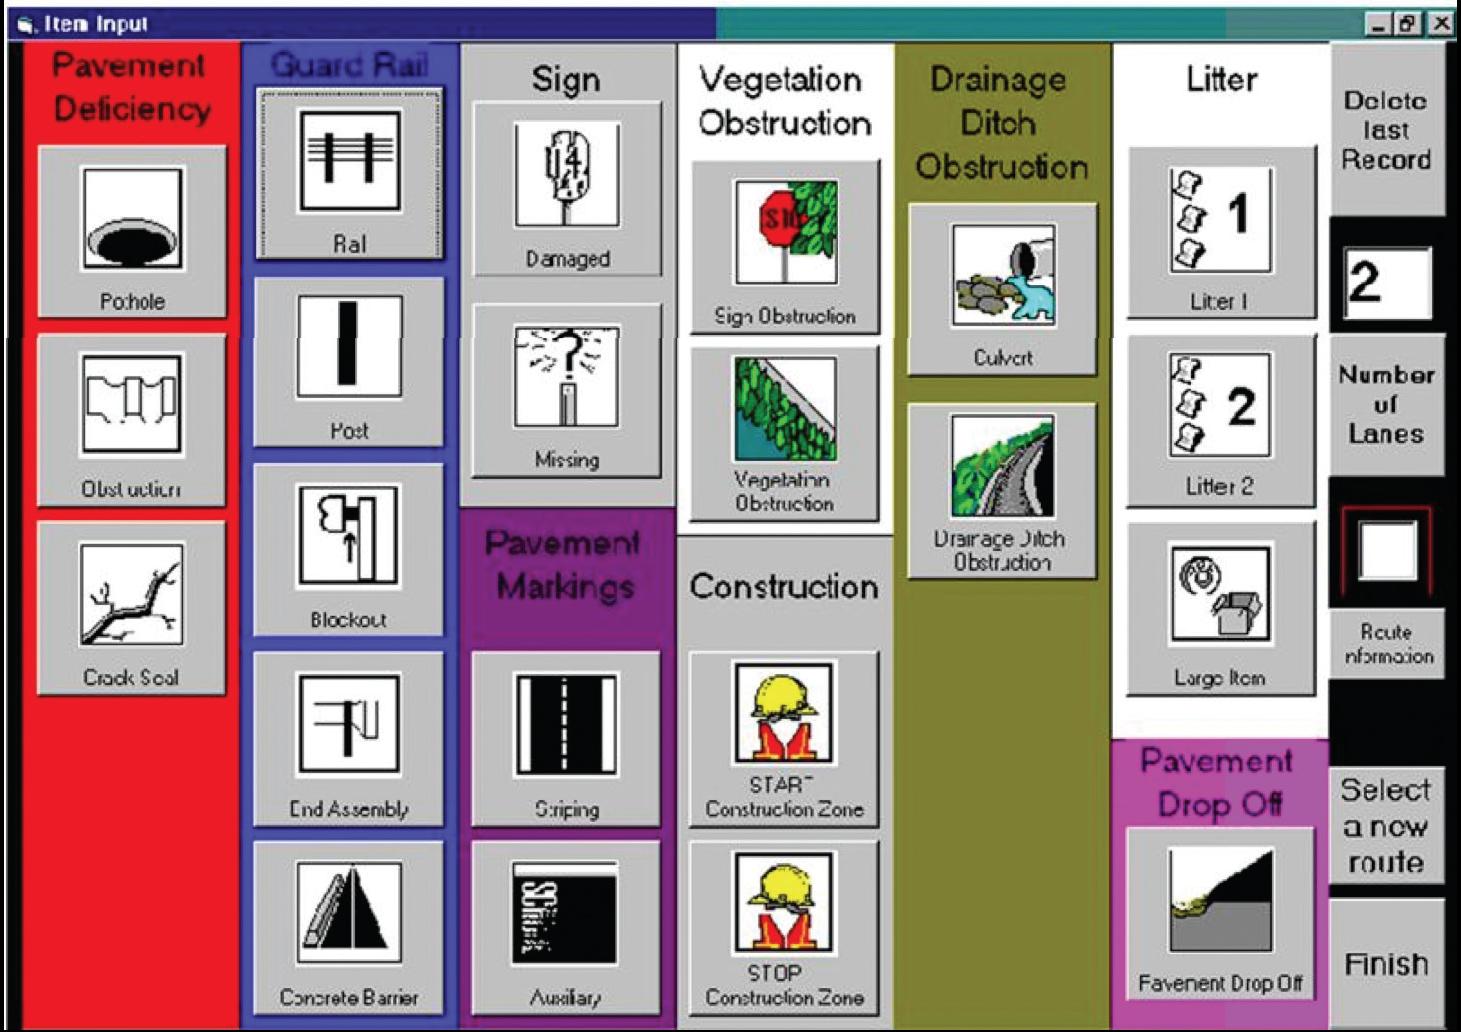 Figure 56 is an image of the laptop computer screen used to capture roadway maintenance deficiencies. The screen has icons of 20 different types of maintenance deficiencies.